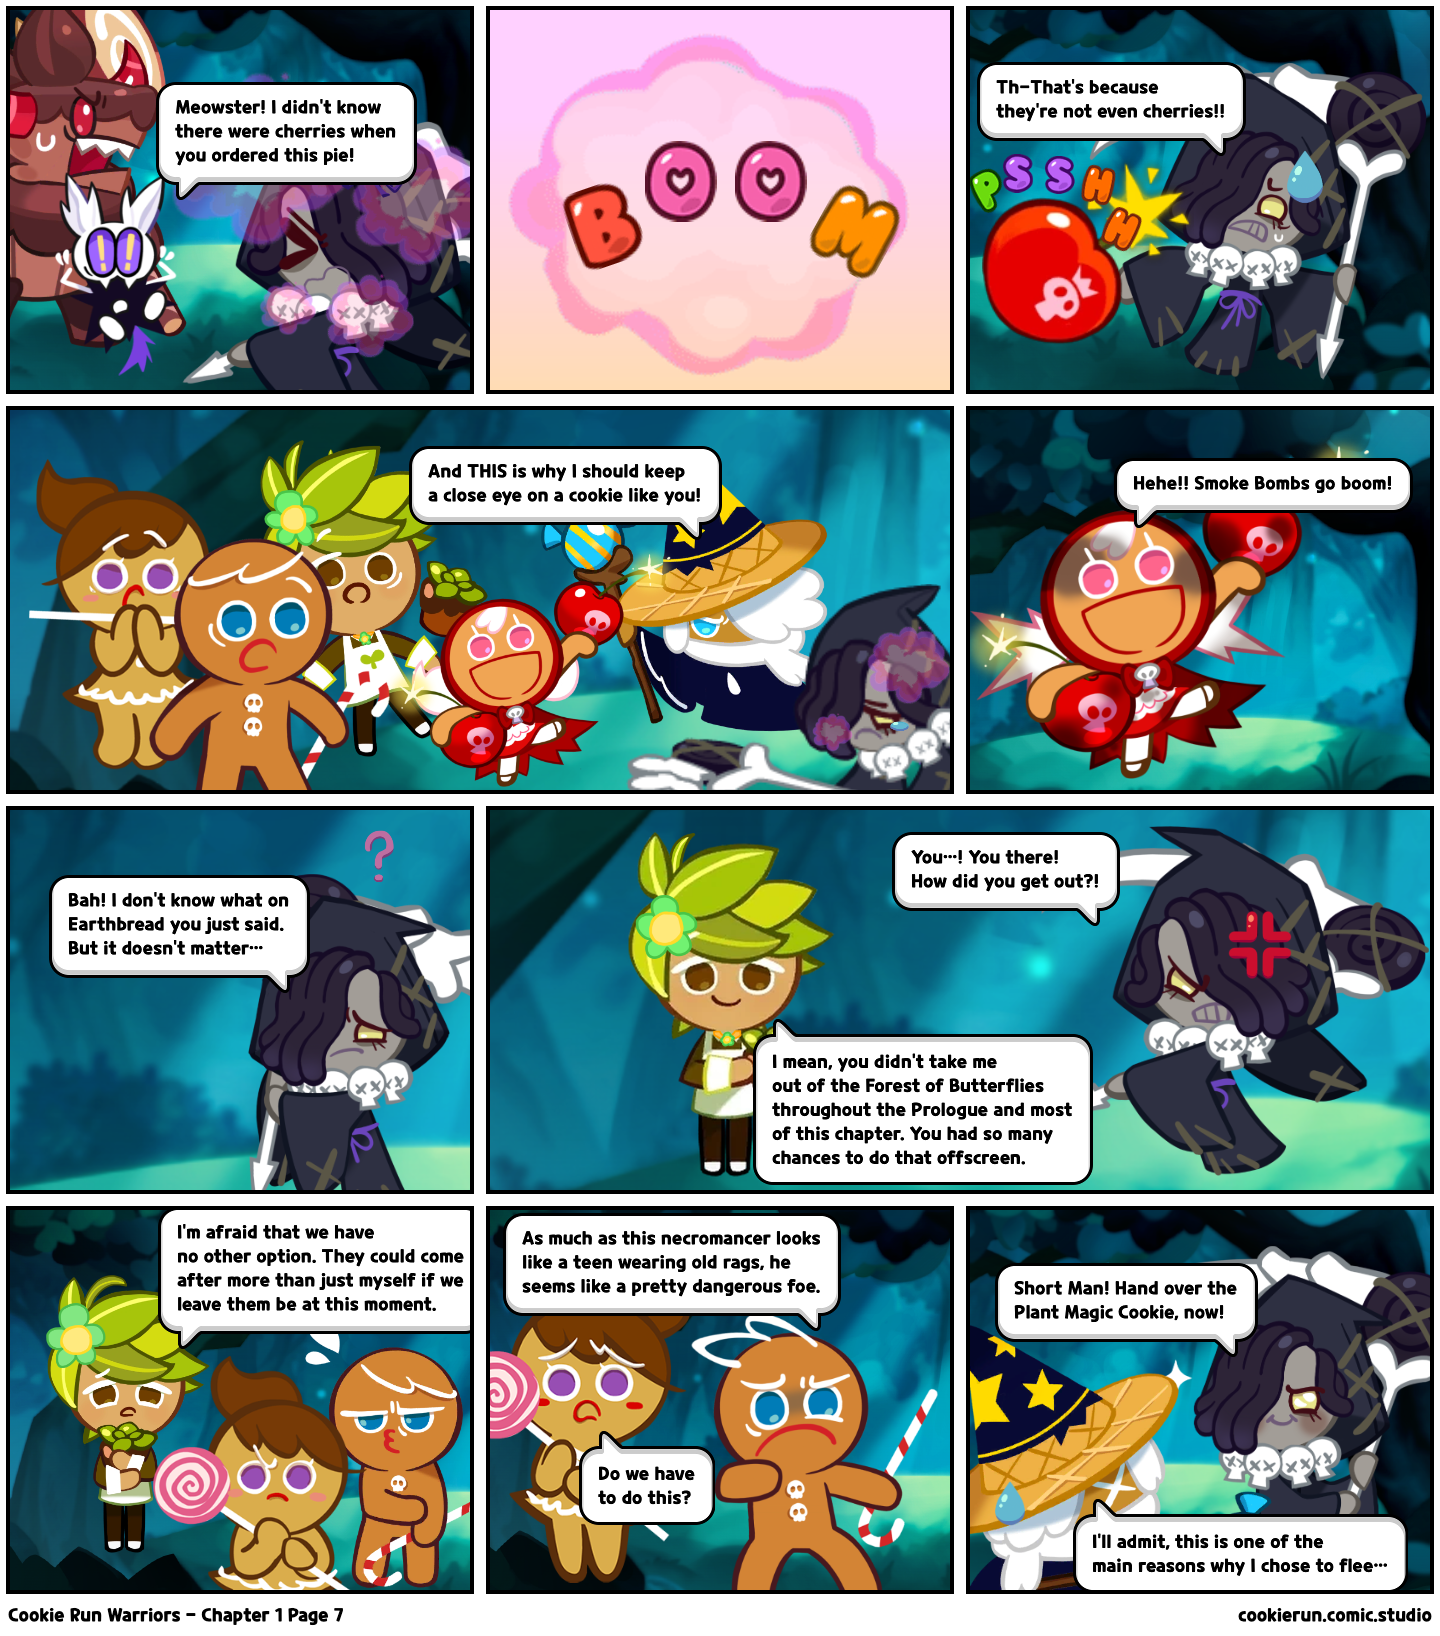 Cookie Run Warriors - Chapter 1 Page 7